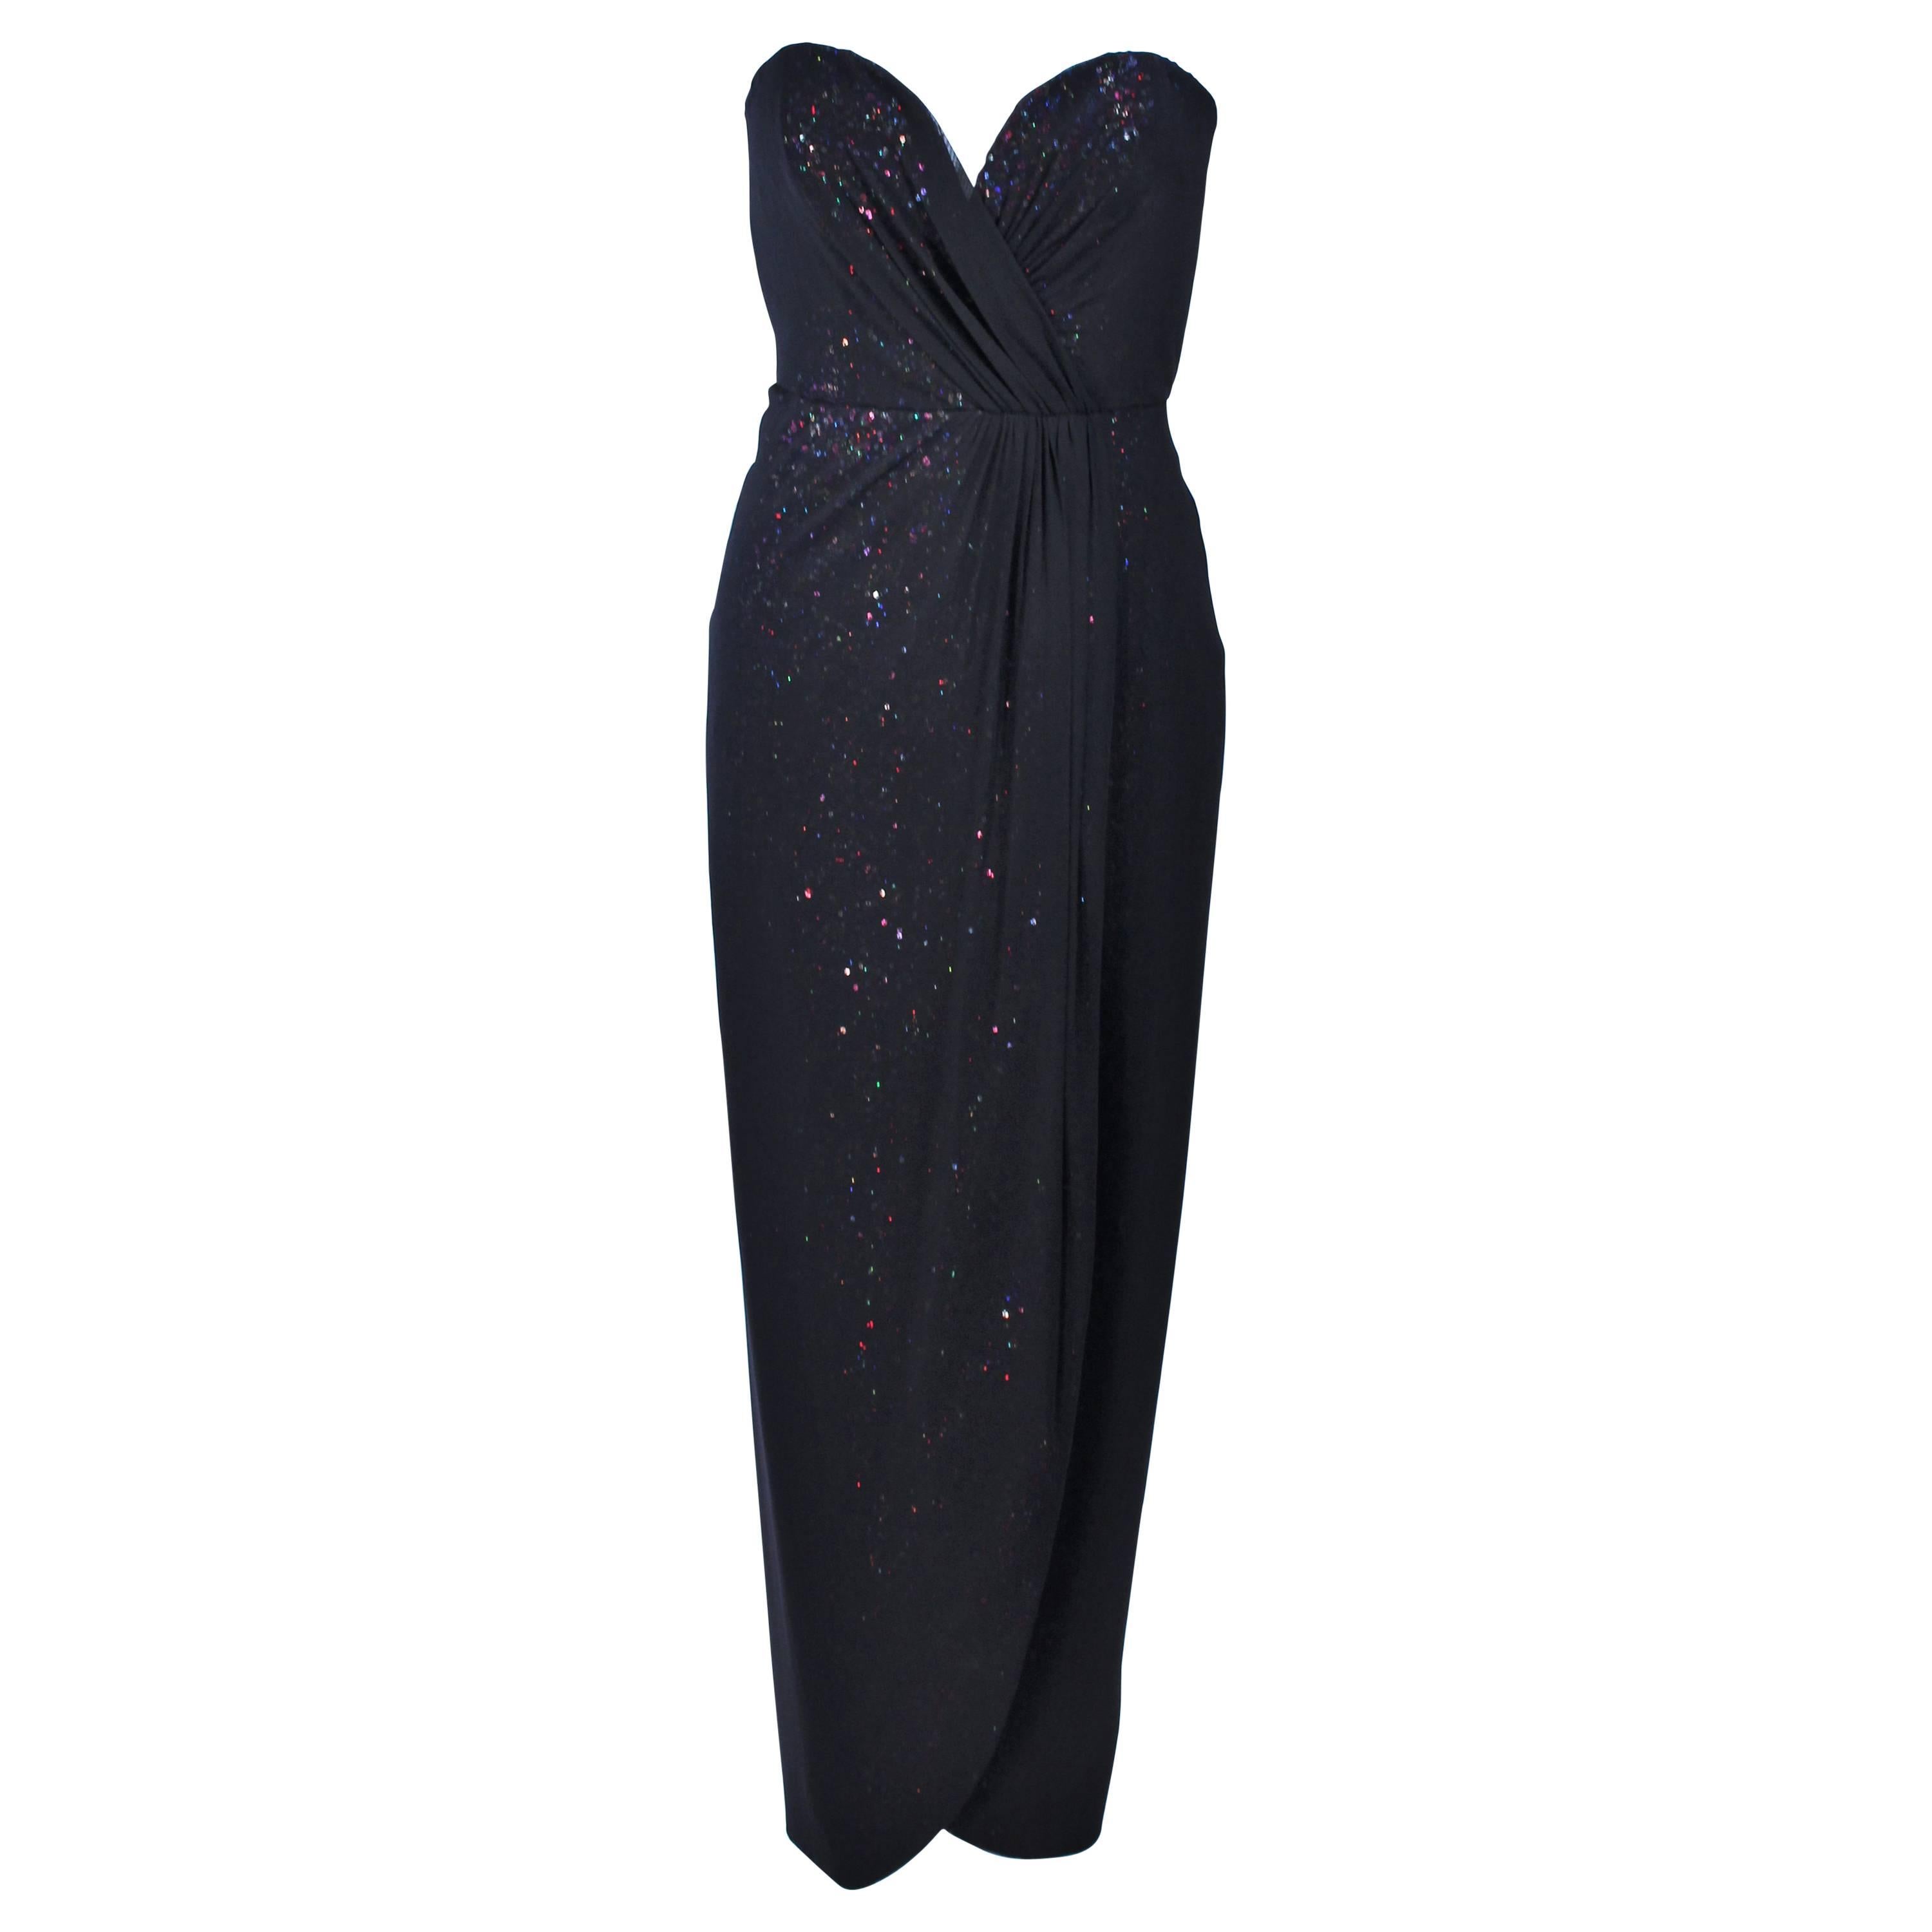 VICKY TIEL Black Draped Gown with Iridescent Rainbow Sequin Interior Size 4